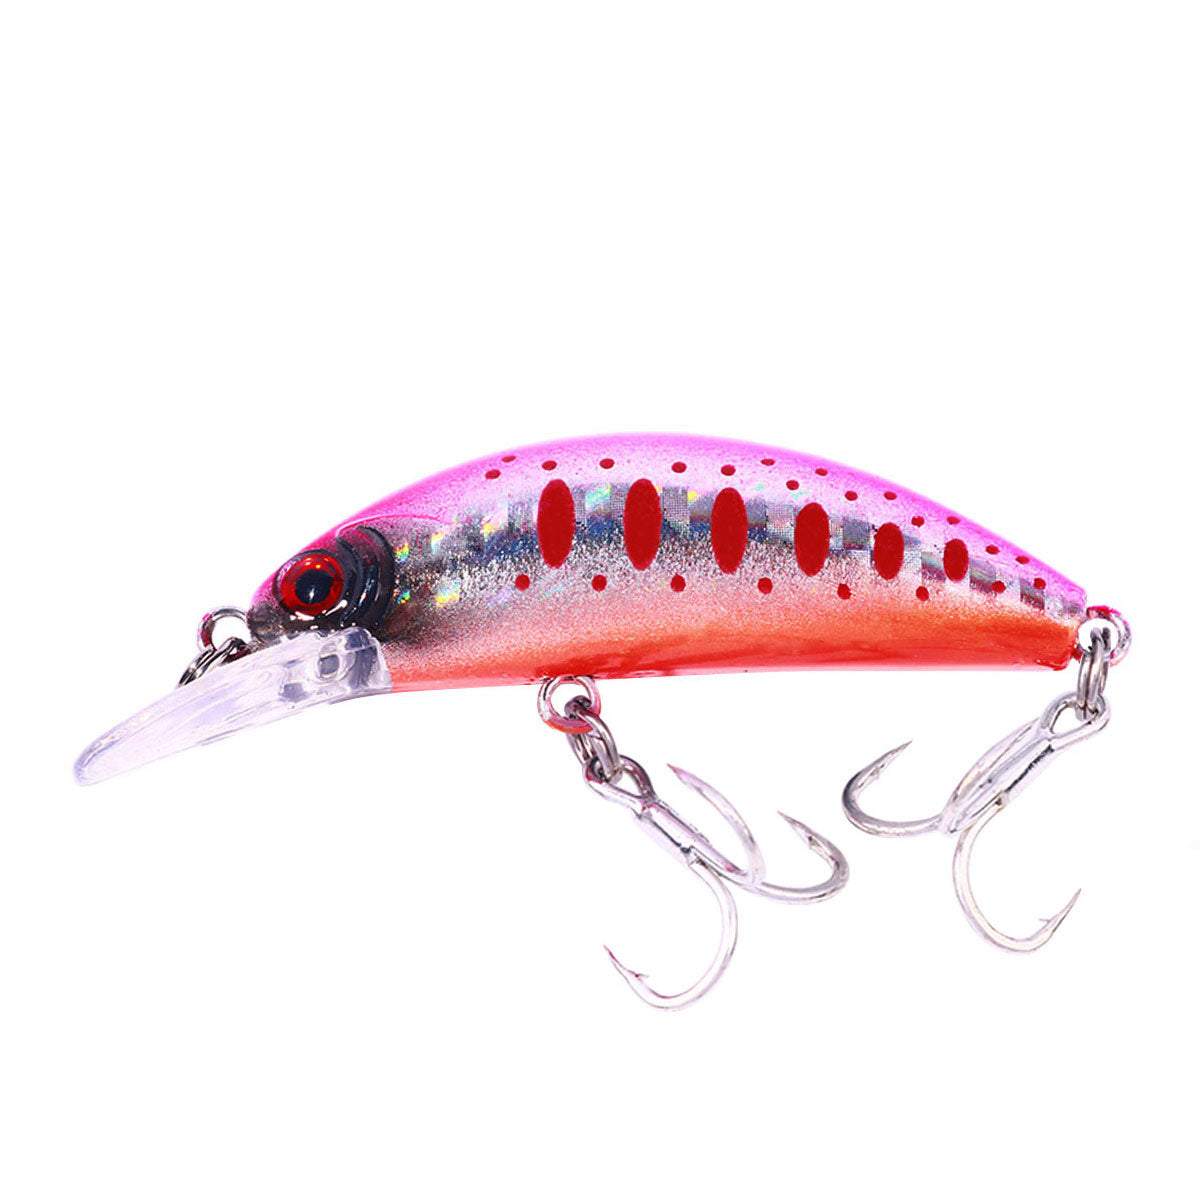 2.36'' 0.19oz Sinking Minnow Lures Hard Plastic for Bass